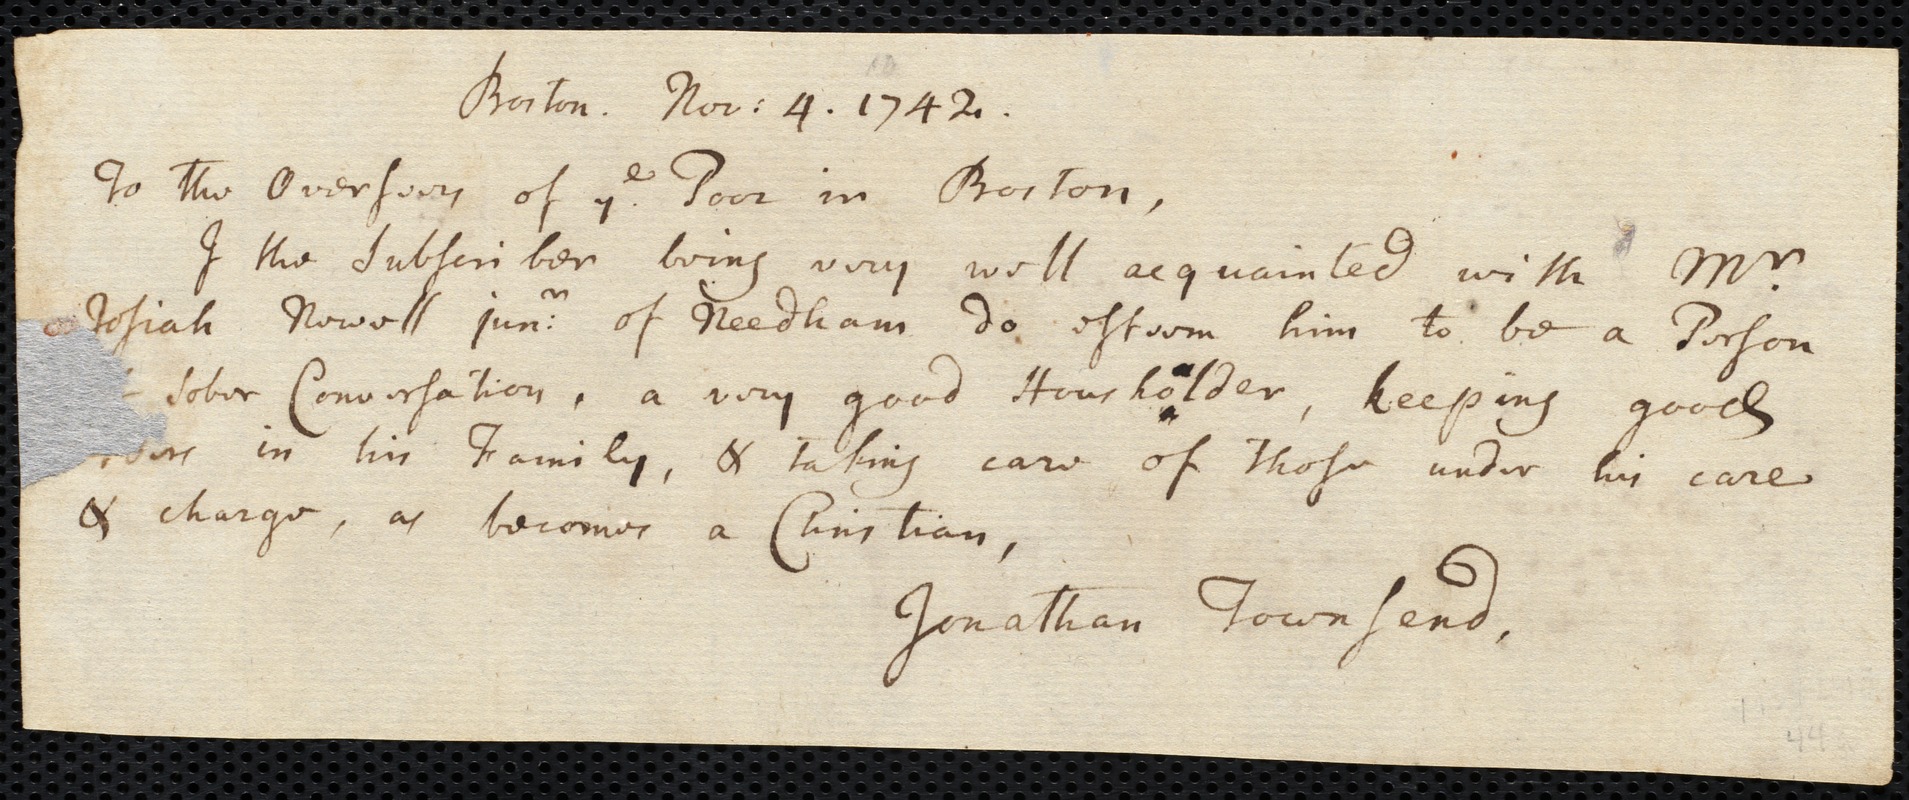 Timothy Hales indentured to apprentice with Josiah Newell of Needham, 1 December 1742